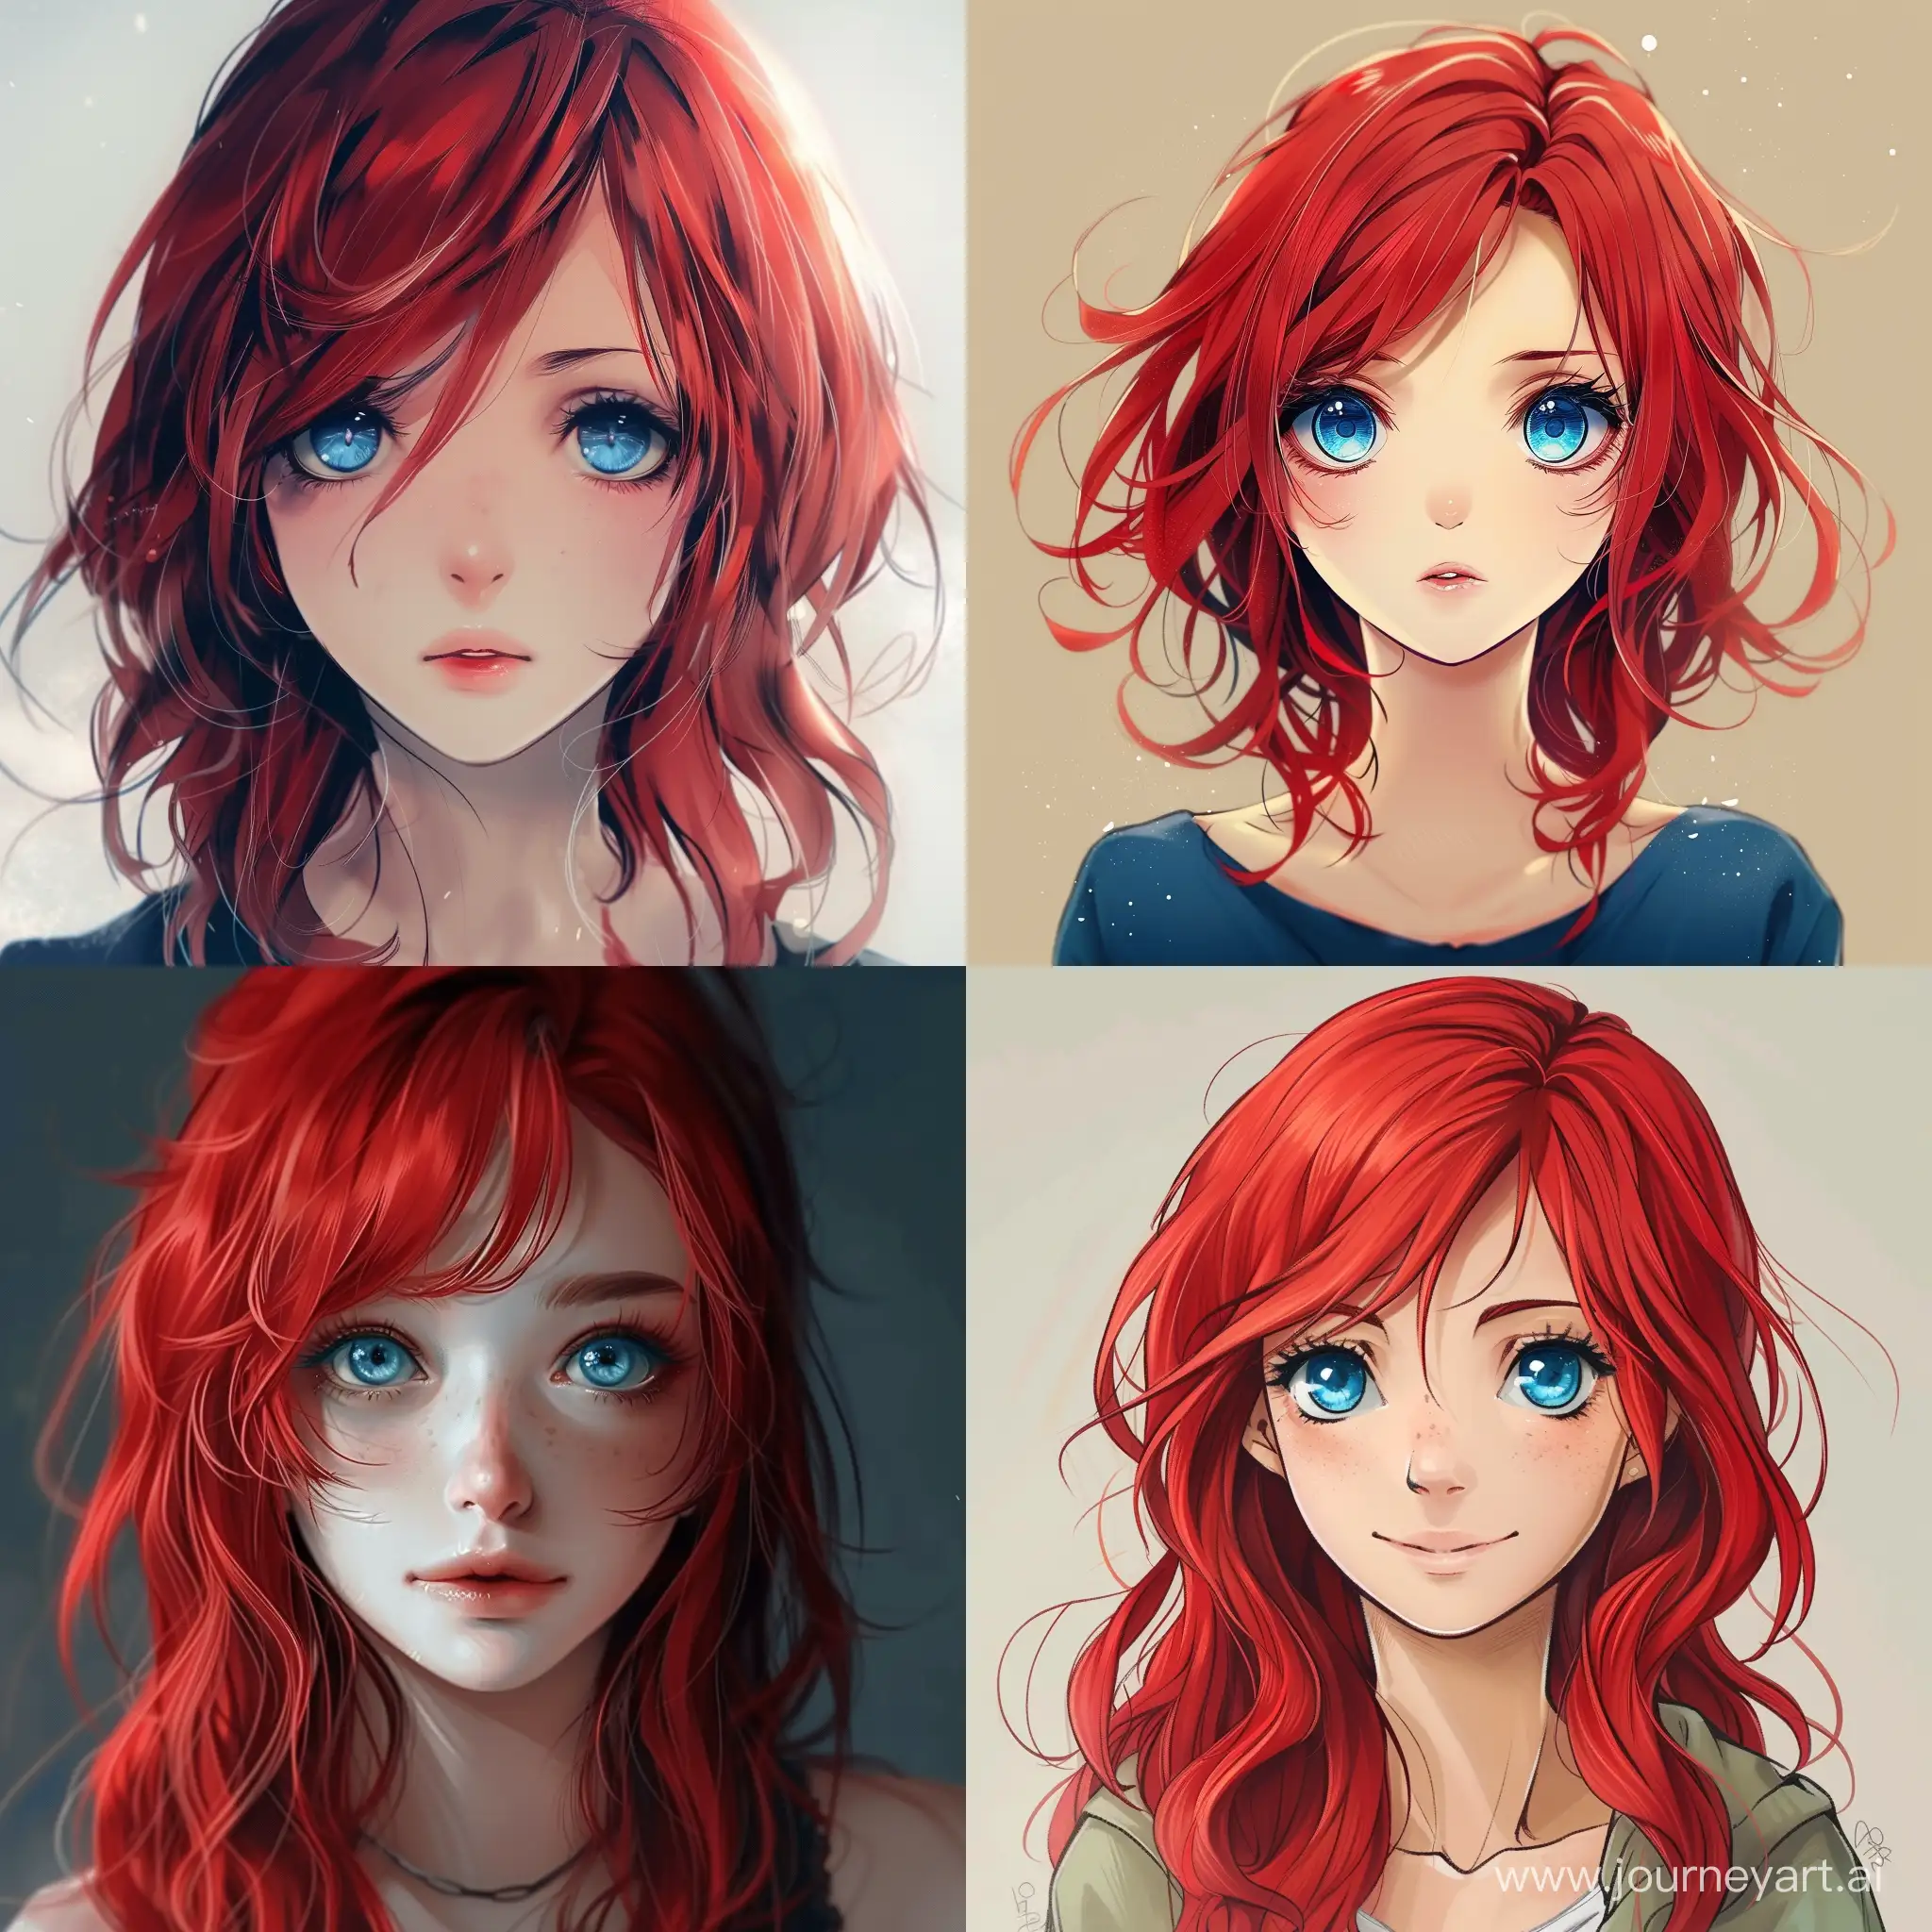 AnimeStyle-Portrait-of-a-RedHaired-Girl-with-Blue-Eyes